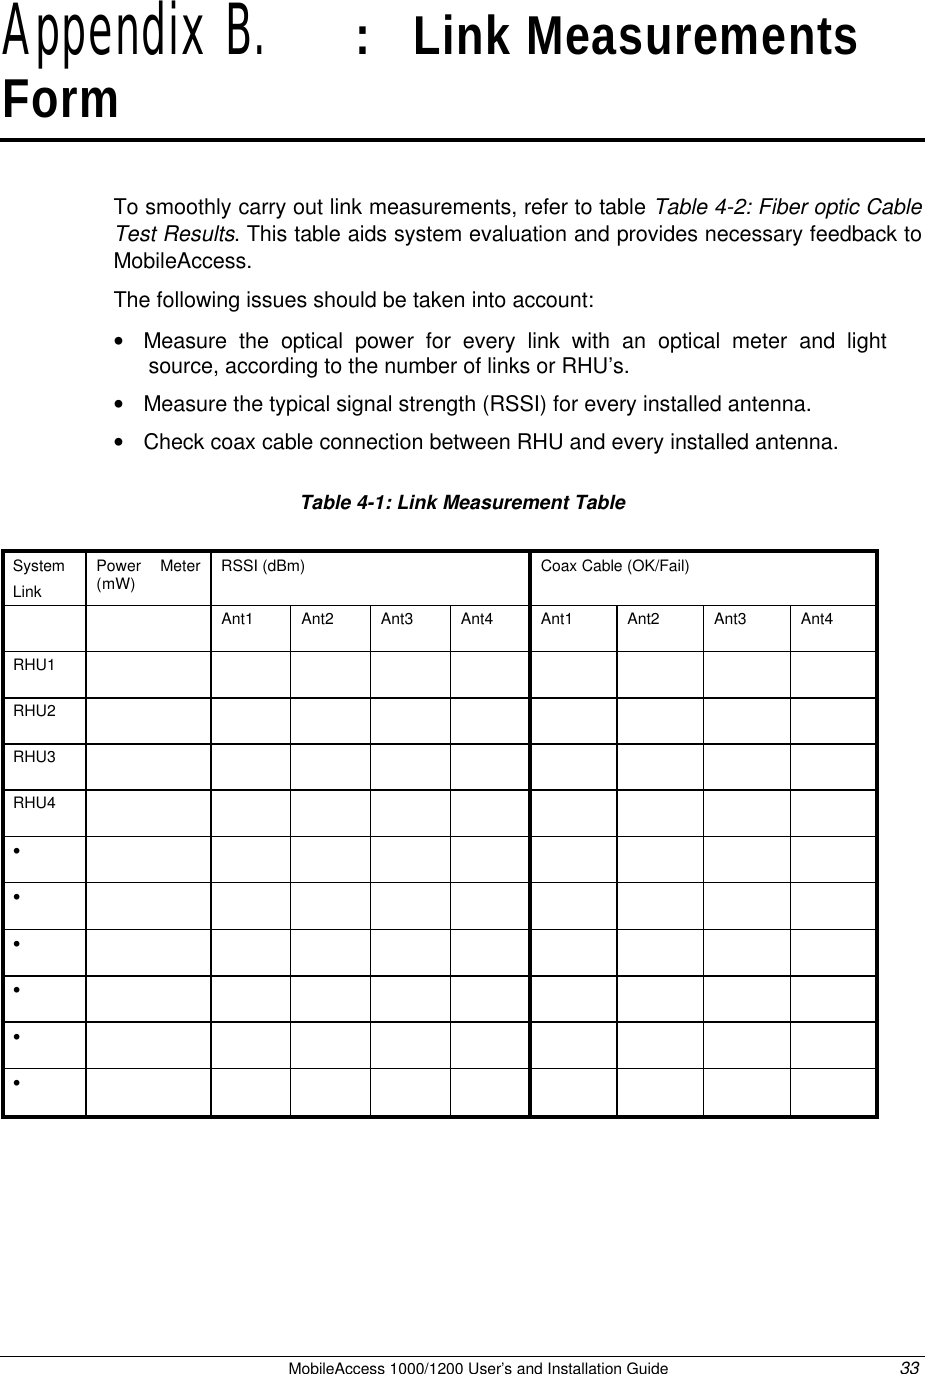   MobileAccess 1000/1200 User’s and Installation Guide 33 Appendix B.   :   Link Measurements Form To smoothly carry out link measurements, refer to table Table 4-2: Fiber optic Cable Test Results. This table aids system evaluation and provides necessary feedback to MobileAccess.   The following issues should be taken into account: • Measure the optical power for every link with an optical meter and light source, according to the number of links or RHU’s. • Measure the typical signal strength (RSSI) for every installed antenna. • Check coax cable connection between RHU and every installed antenna.     Table 4-1: Link Measurement Table  System Link Power Meter (mW) RSSI (dBm)  Coax Cable (OK/Fail)    Ant1 Ant2 Ant3 Ant4 Ant1 Ant2 Ant3 Ant4 RHU1                  RHU2                  RHU3                  RHU4                  •                   •                   •                   •                   •                   •                    